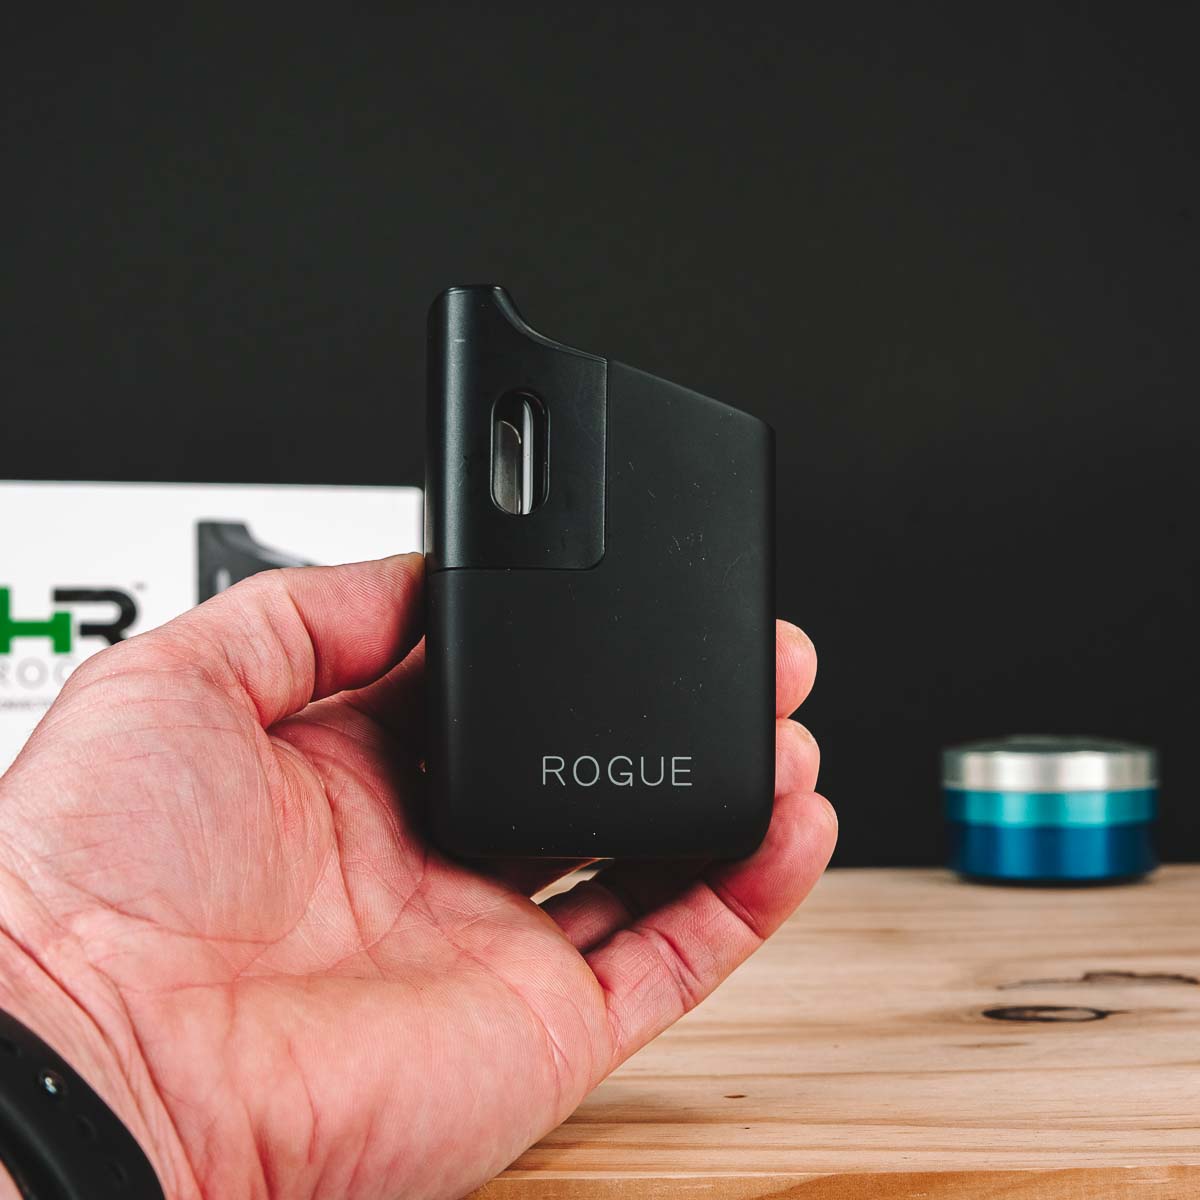 HR ROGUE Vaporizer - Size in Hand